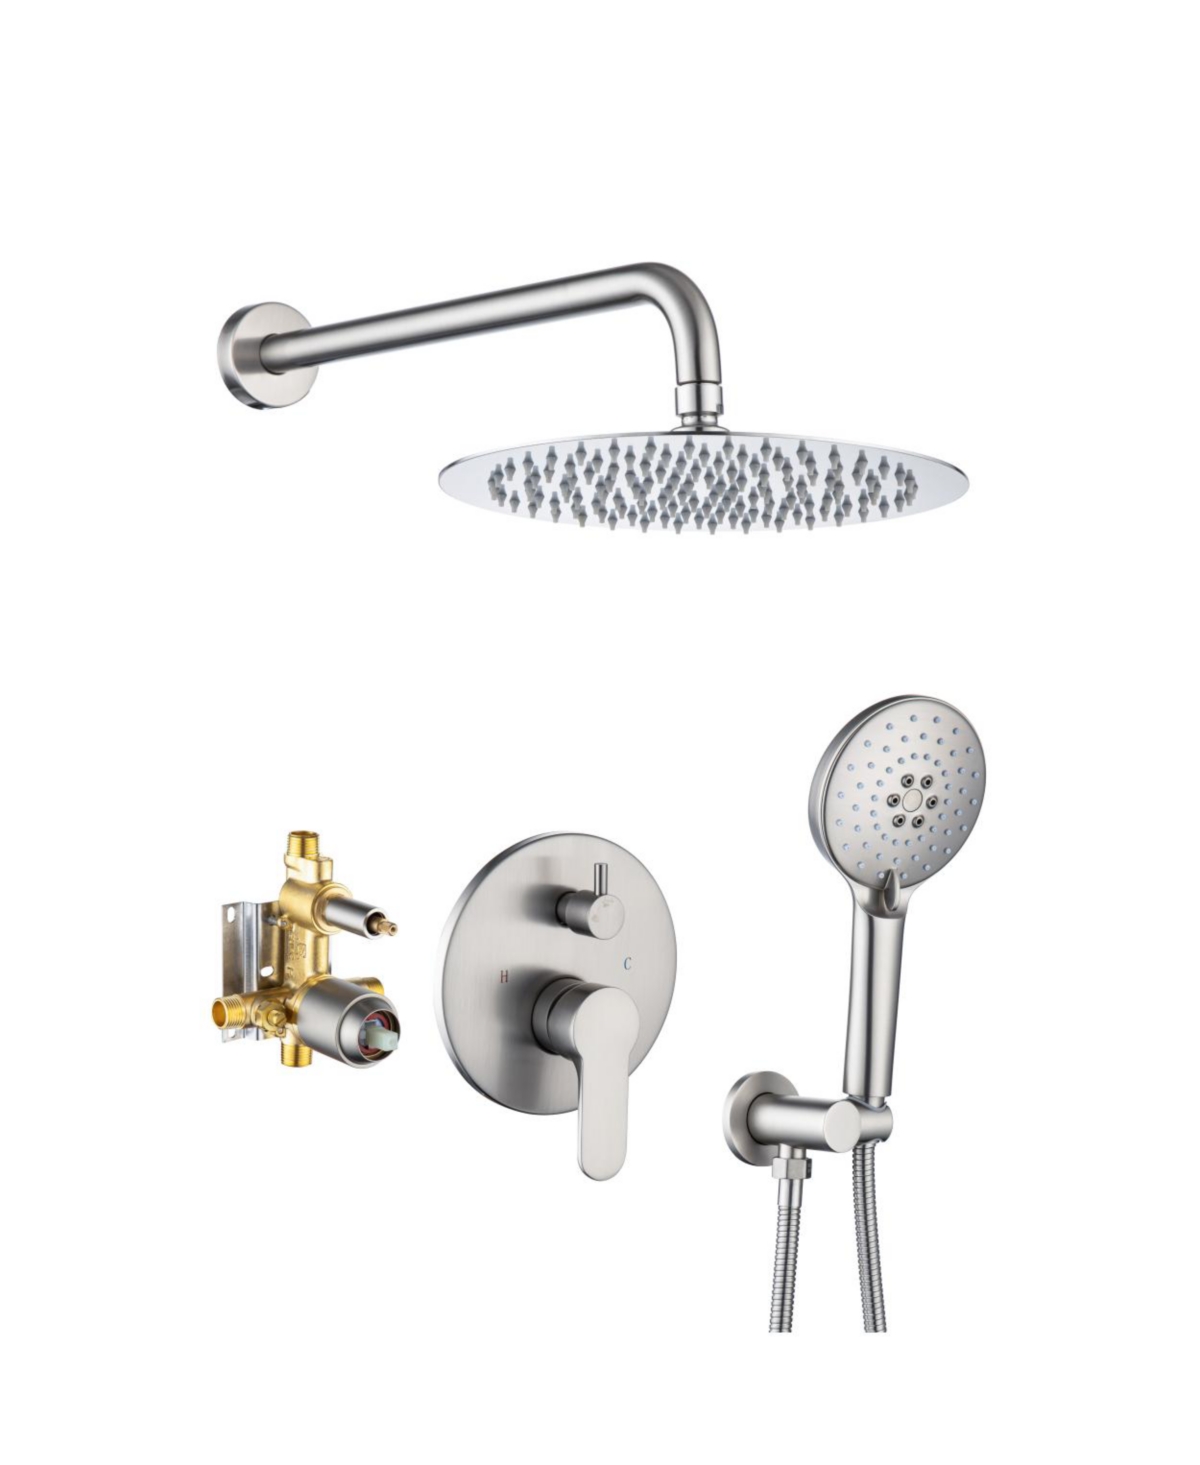 Rough-in Valve Included Shower Faucet Set - Silver